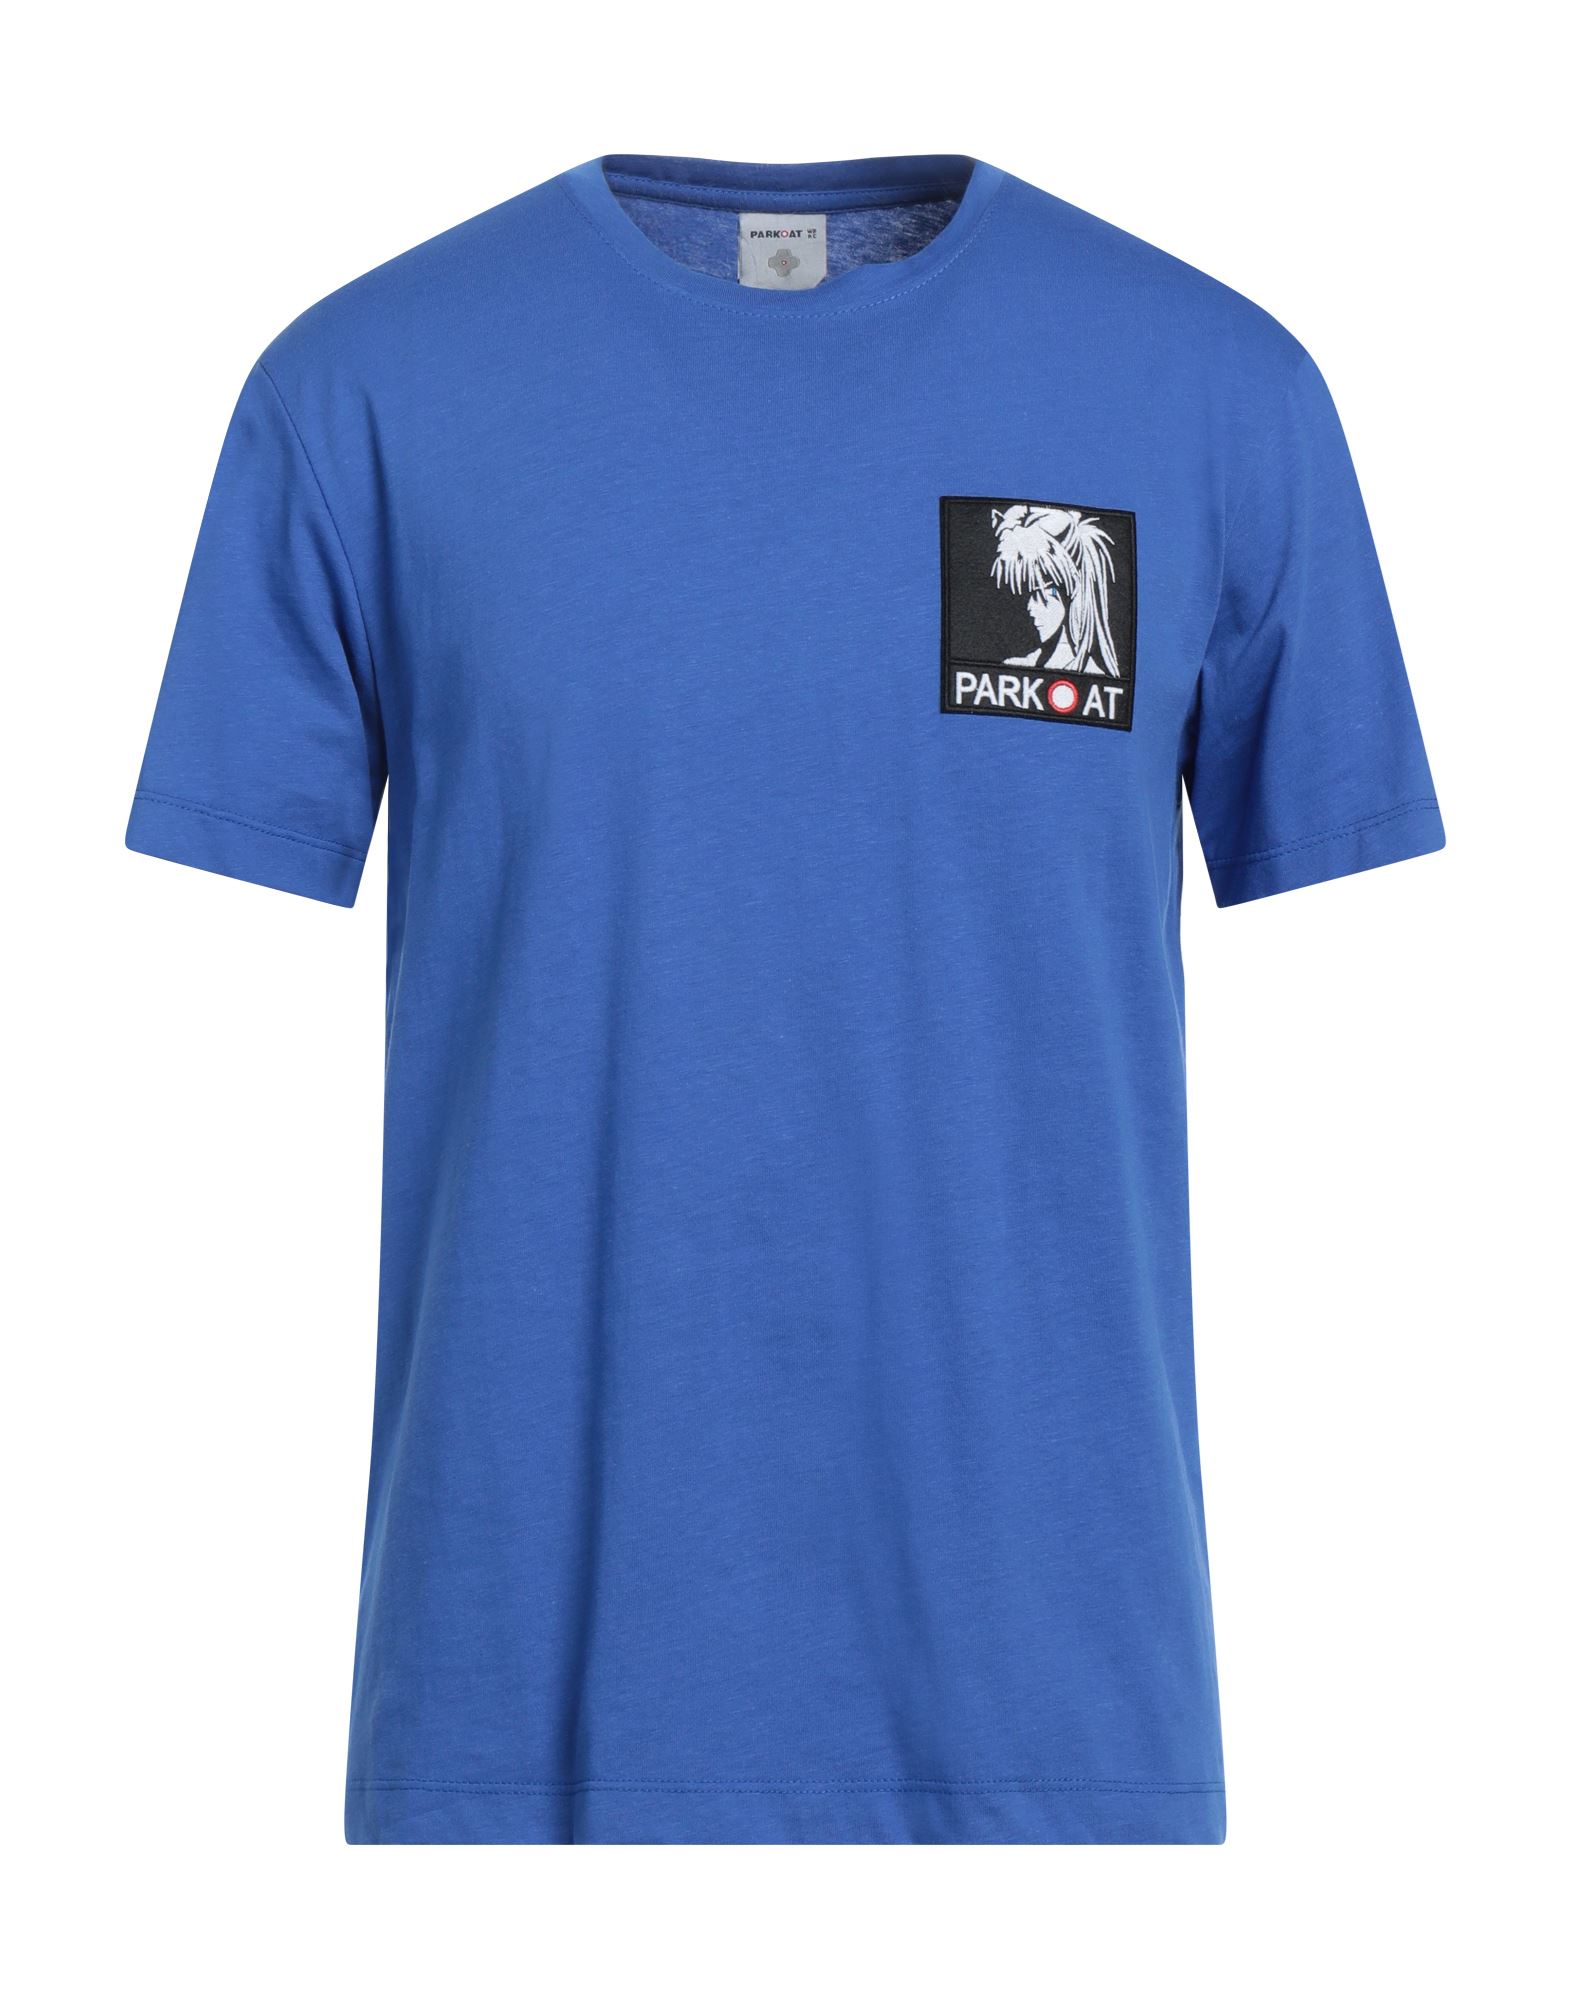 Parkoat T-shirts In Blue